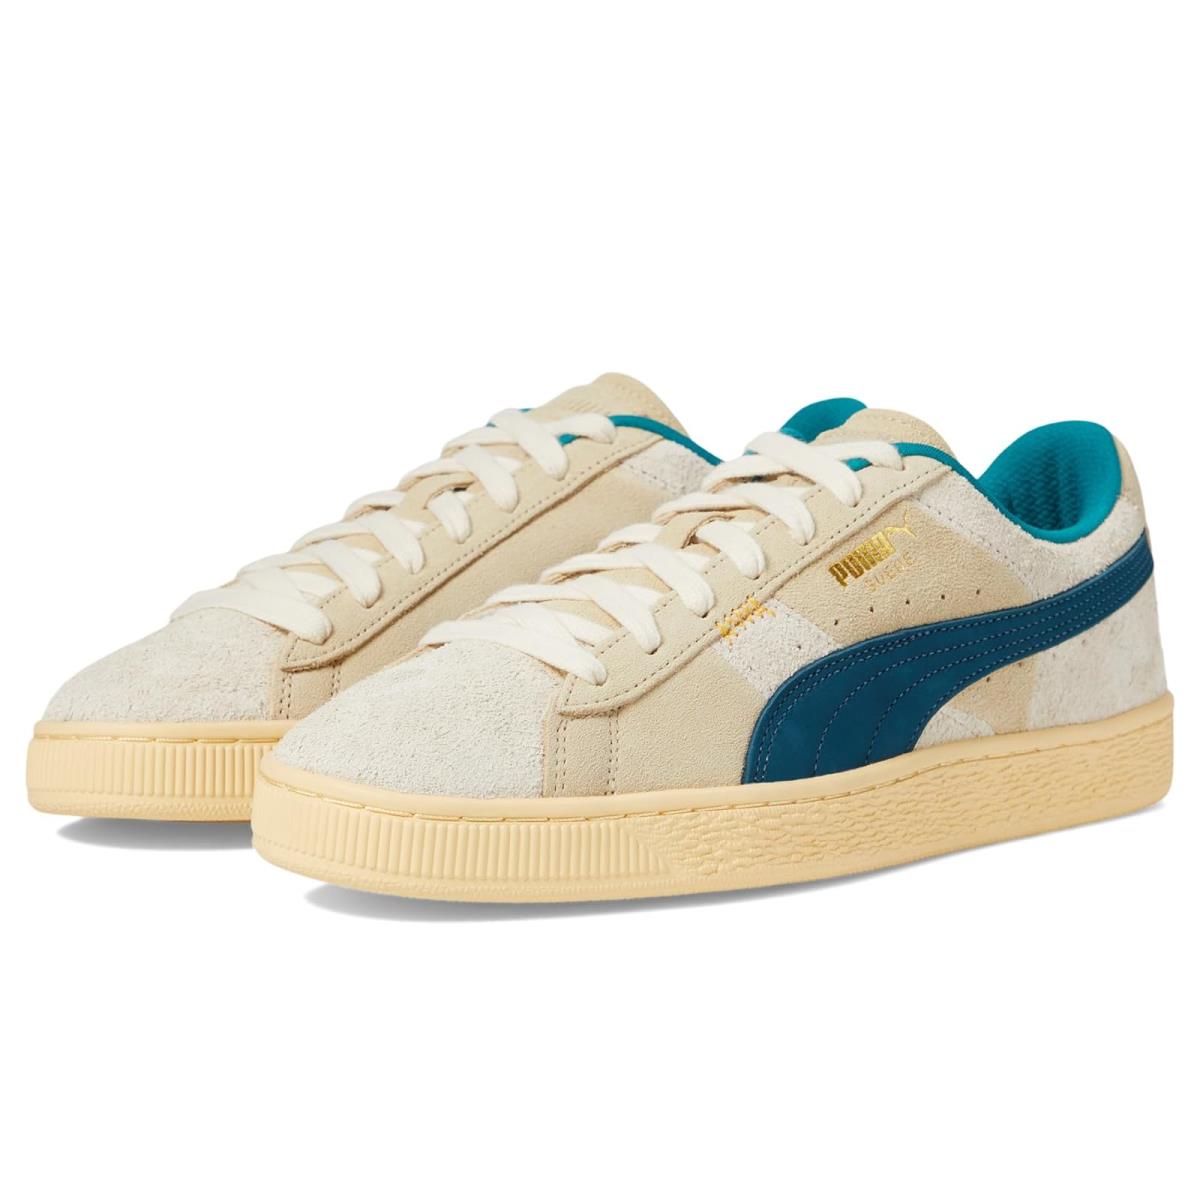 Man`s Sneakers Athletic Shoes Puma Suede Classic Xxi Underdogs - Sugared Almond/Ocean Tropic/Putty